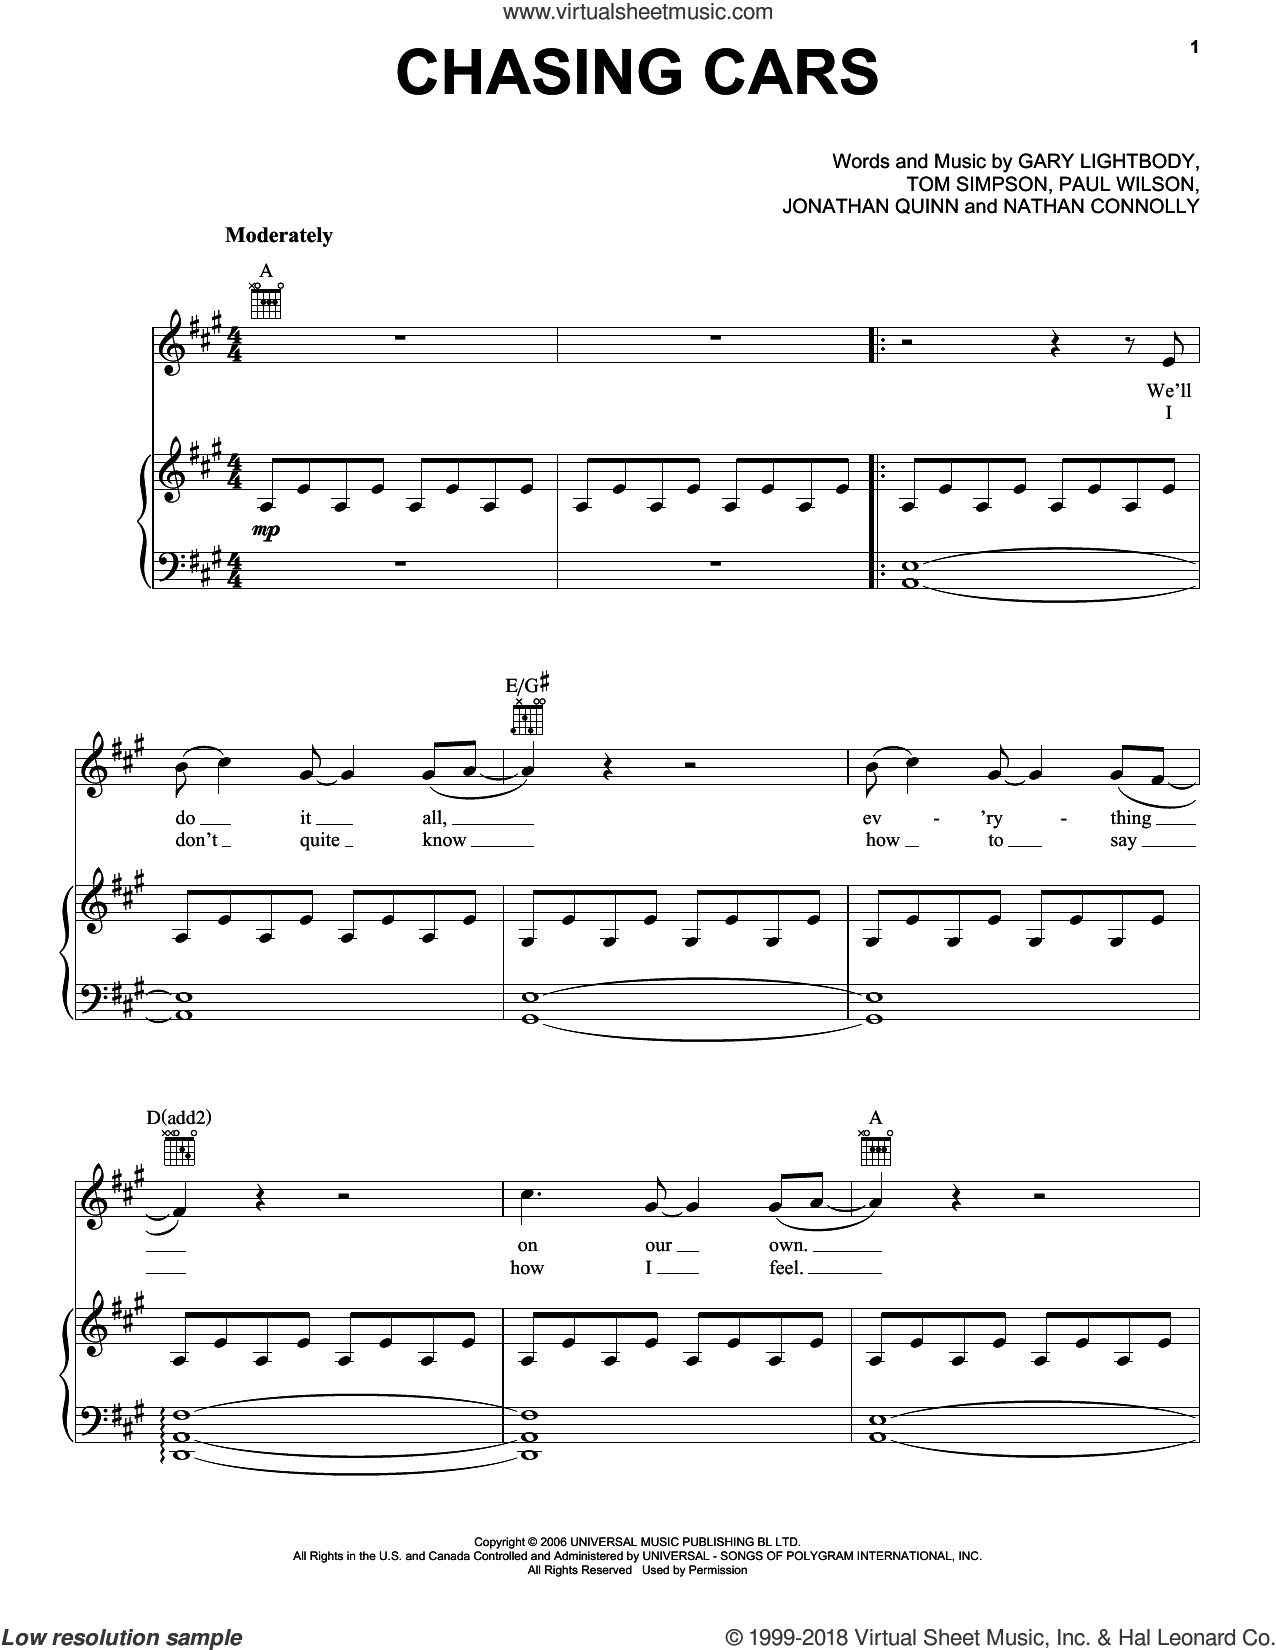 Chasing Cars sheet music for voice, piano or guitar v3